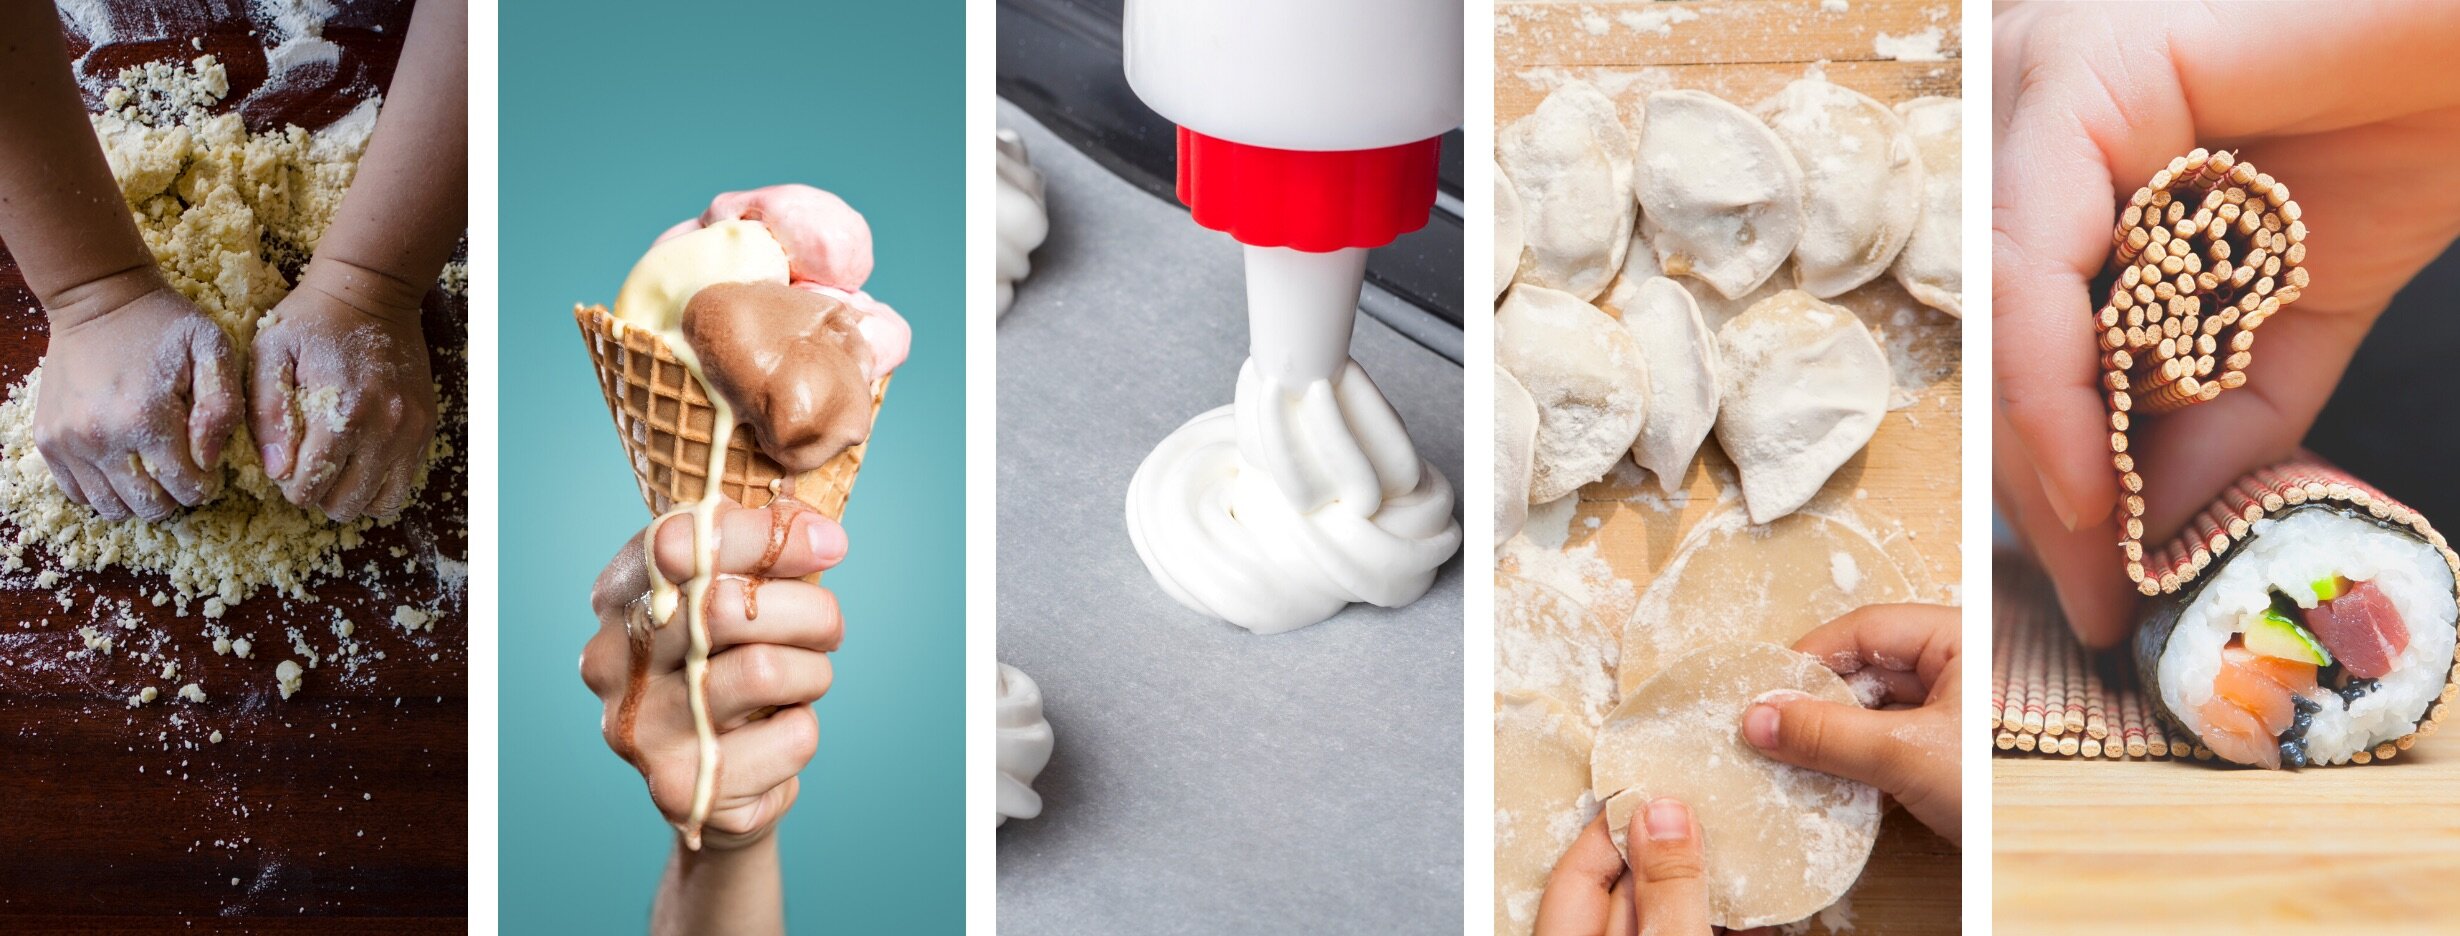 Projects for learning in the kitchen: make bread, ice cream, meringue, dumplings, and sushi!